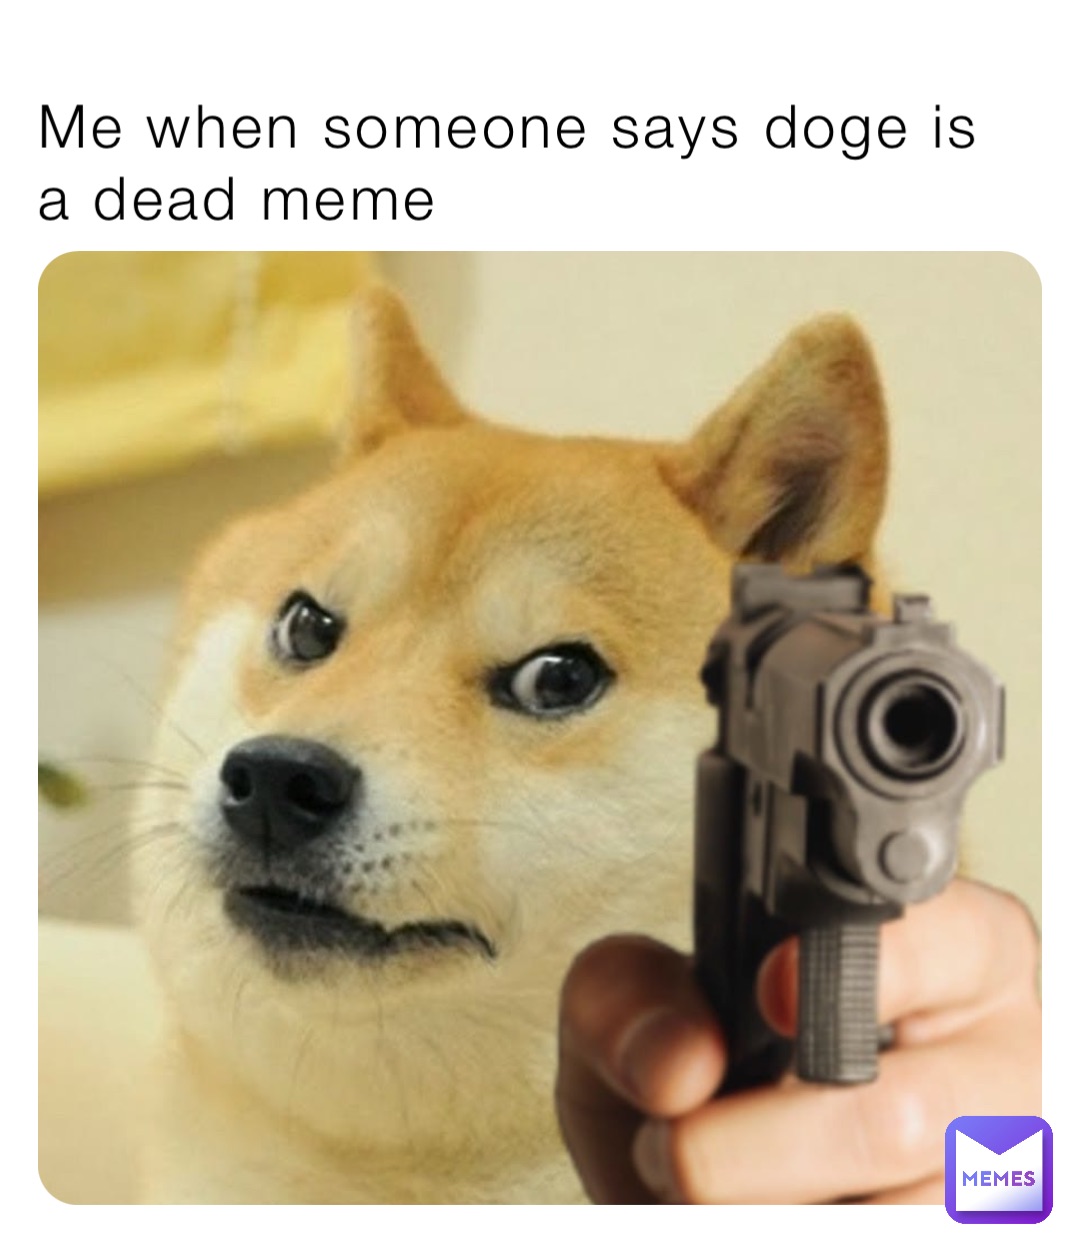 Me when someone says doge is a dead meme